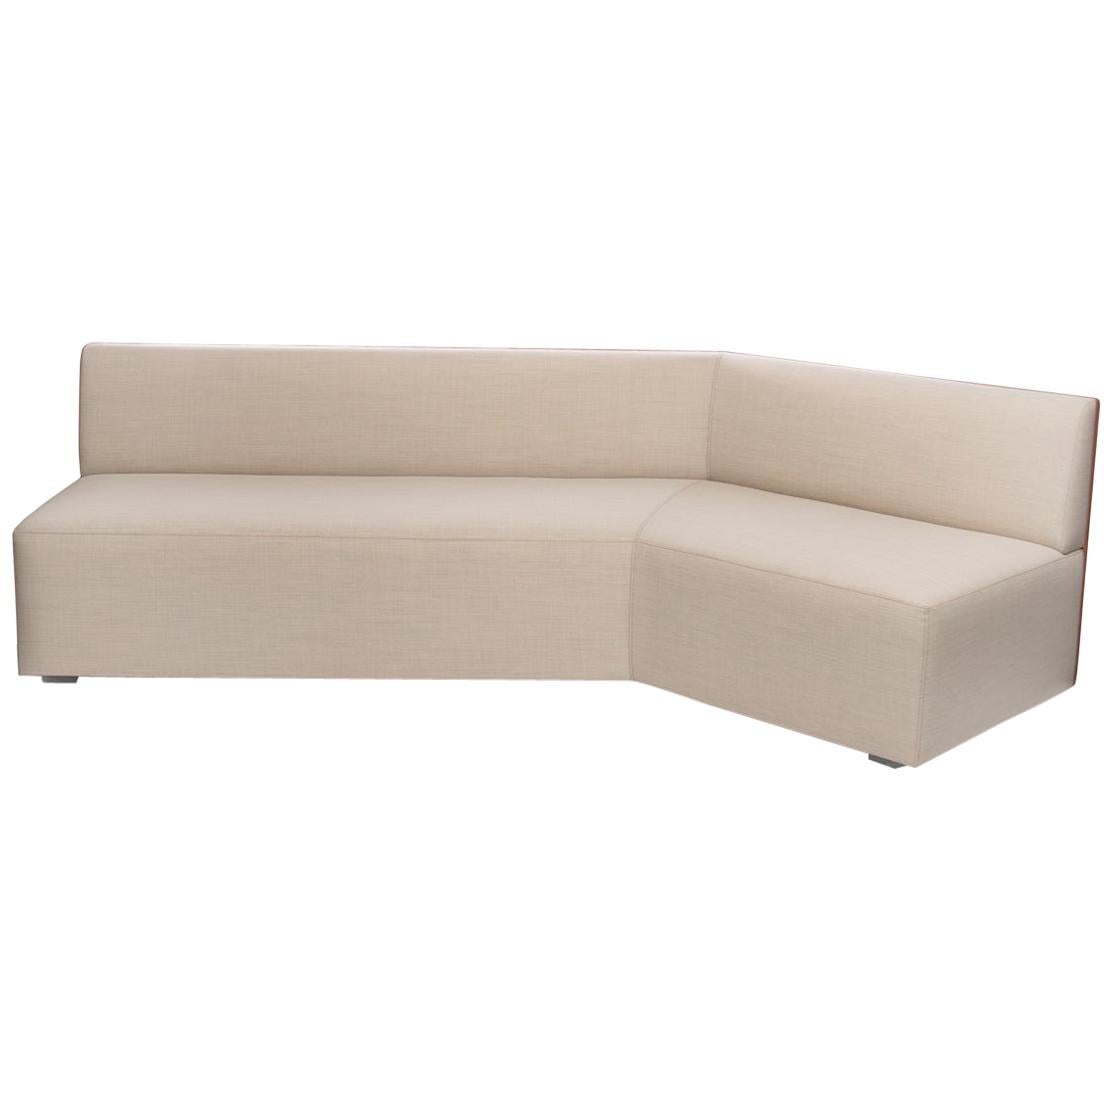 Sofa in Beige Fabrics and Brown Leather by Vincent Le Bourdon Handmade